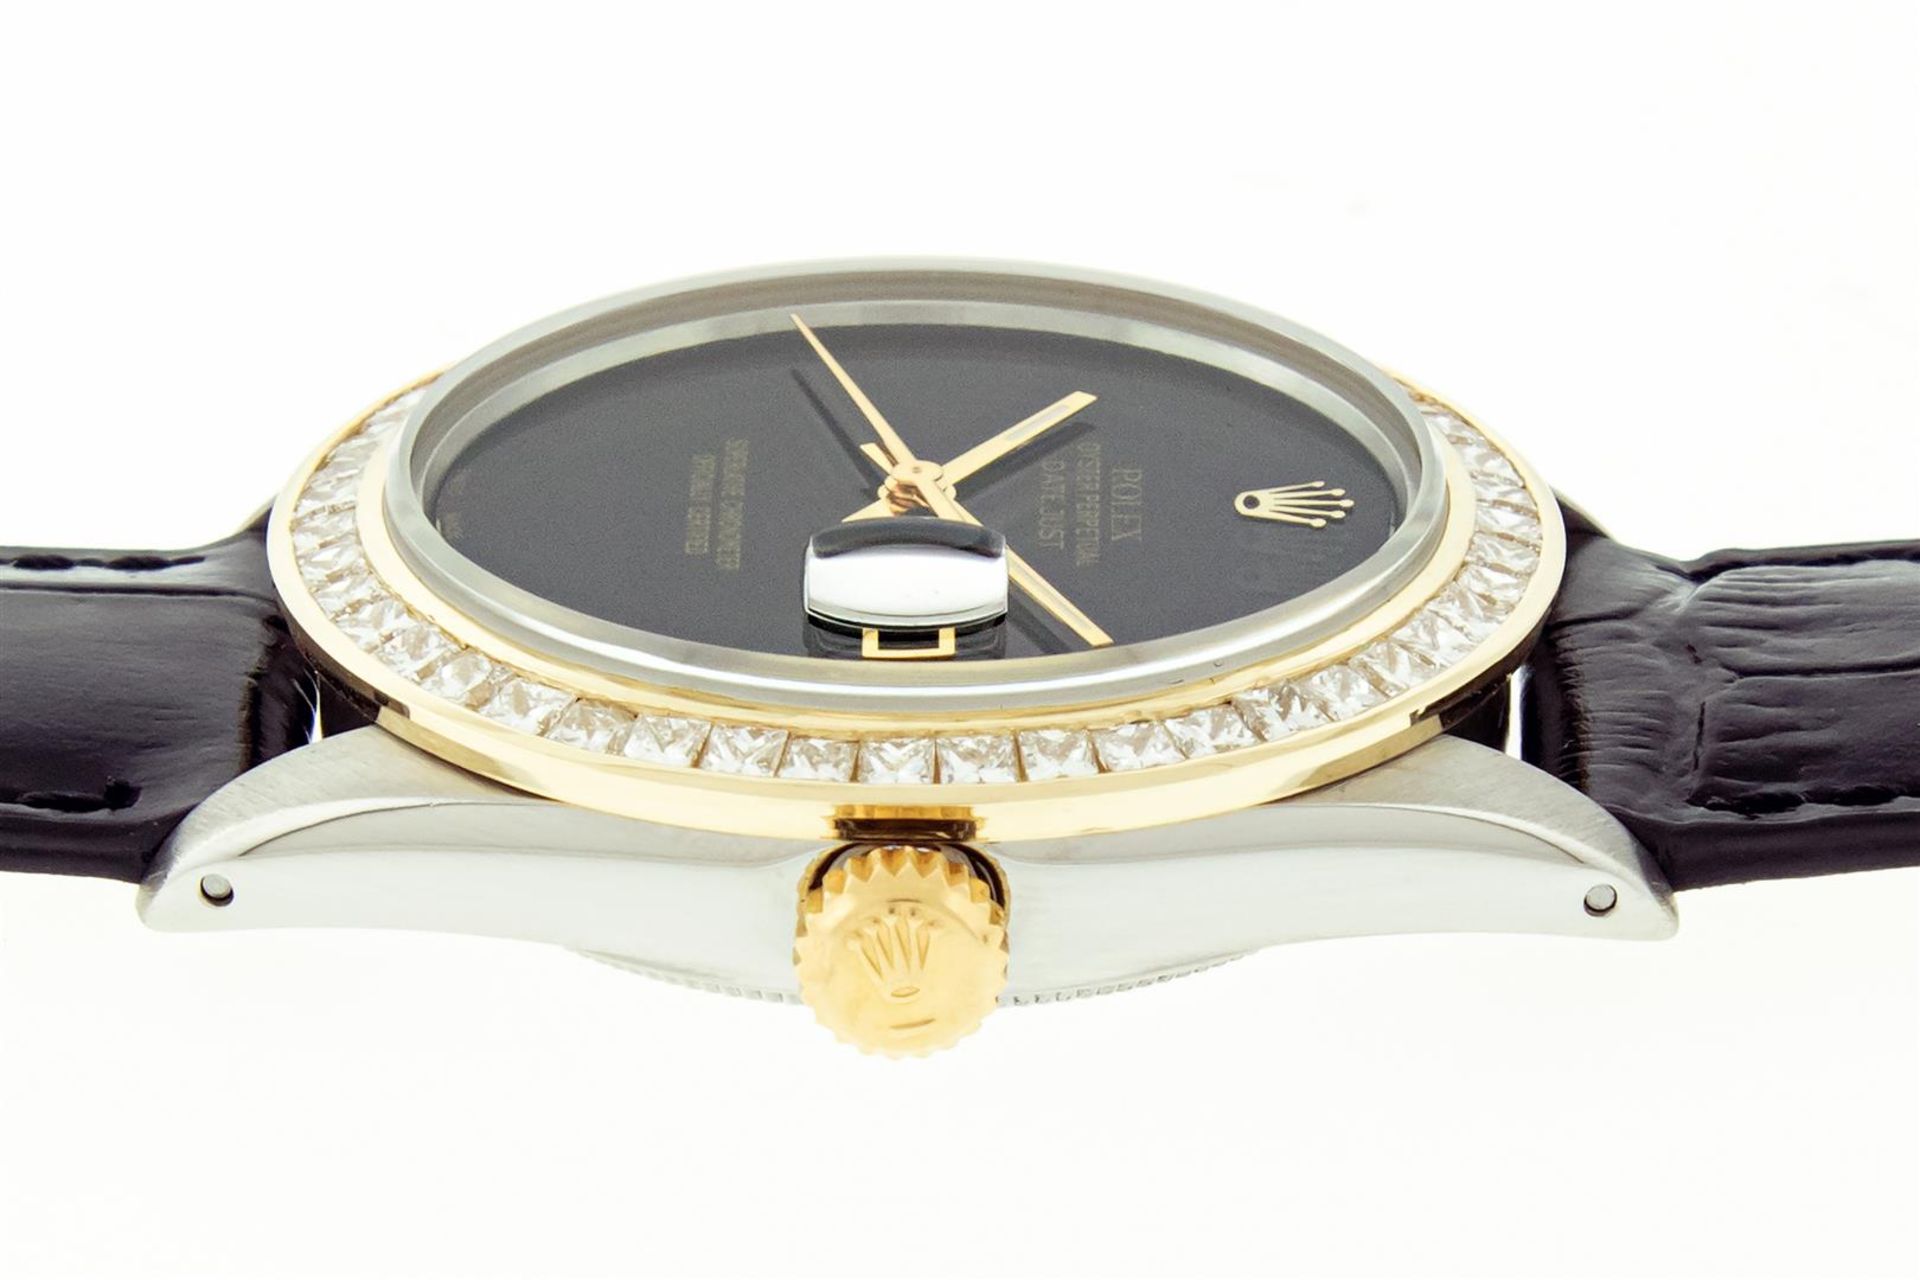 Rolex 36 Datejust Black Onyx 2.75ctw Princess Diamond Leather Band Oyster Perpet - Image 5 of 8